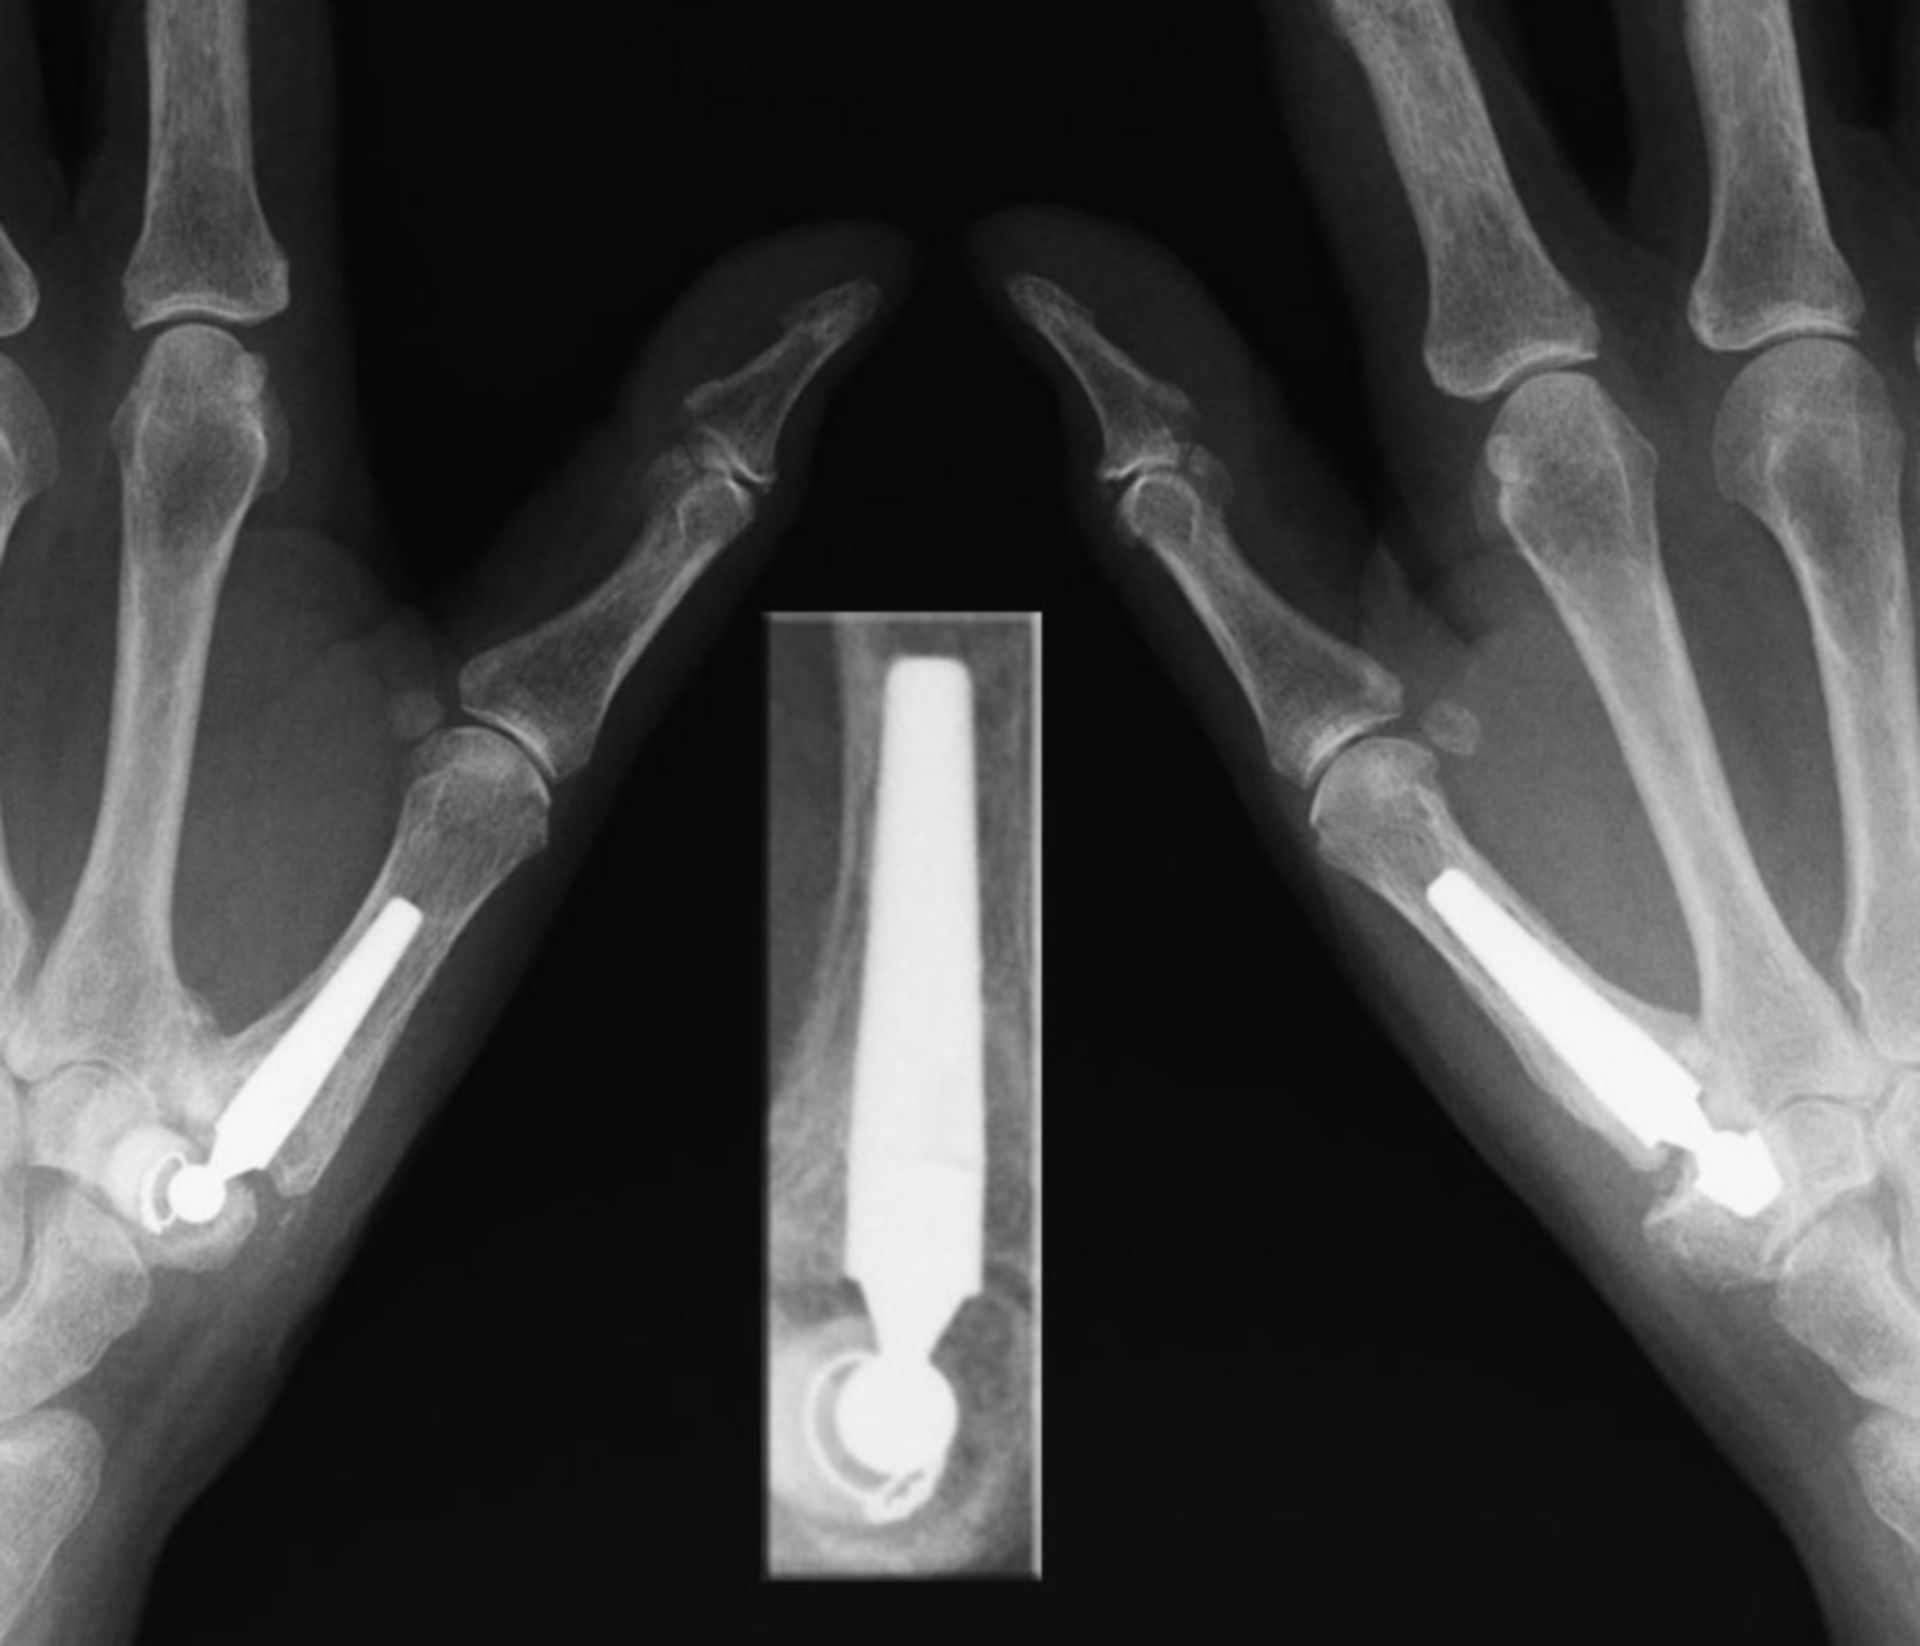 Endoprothesis of the carpometacarpal joint of the thumb